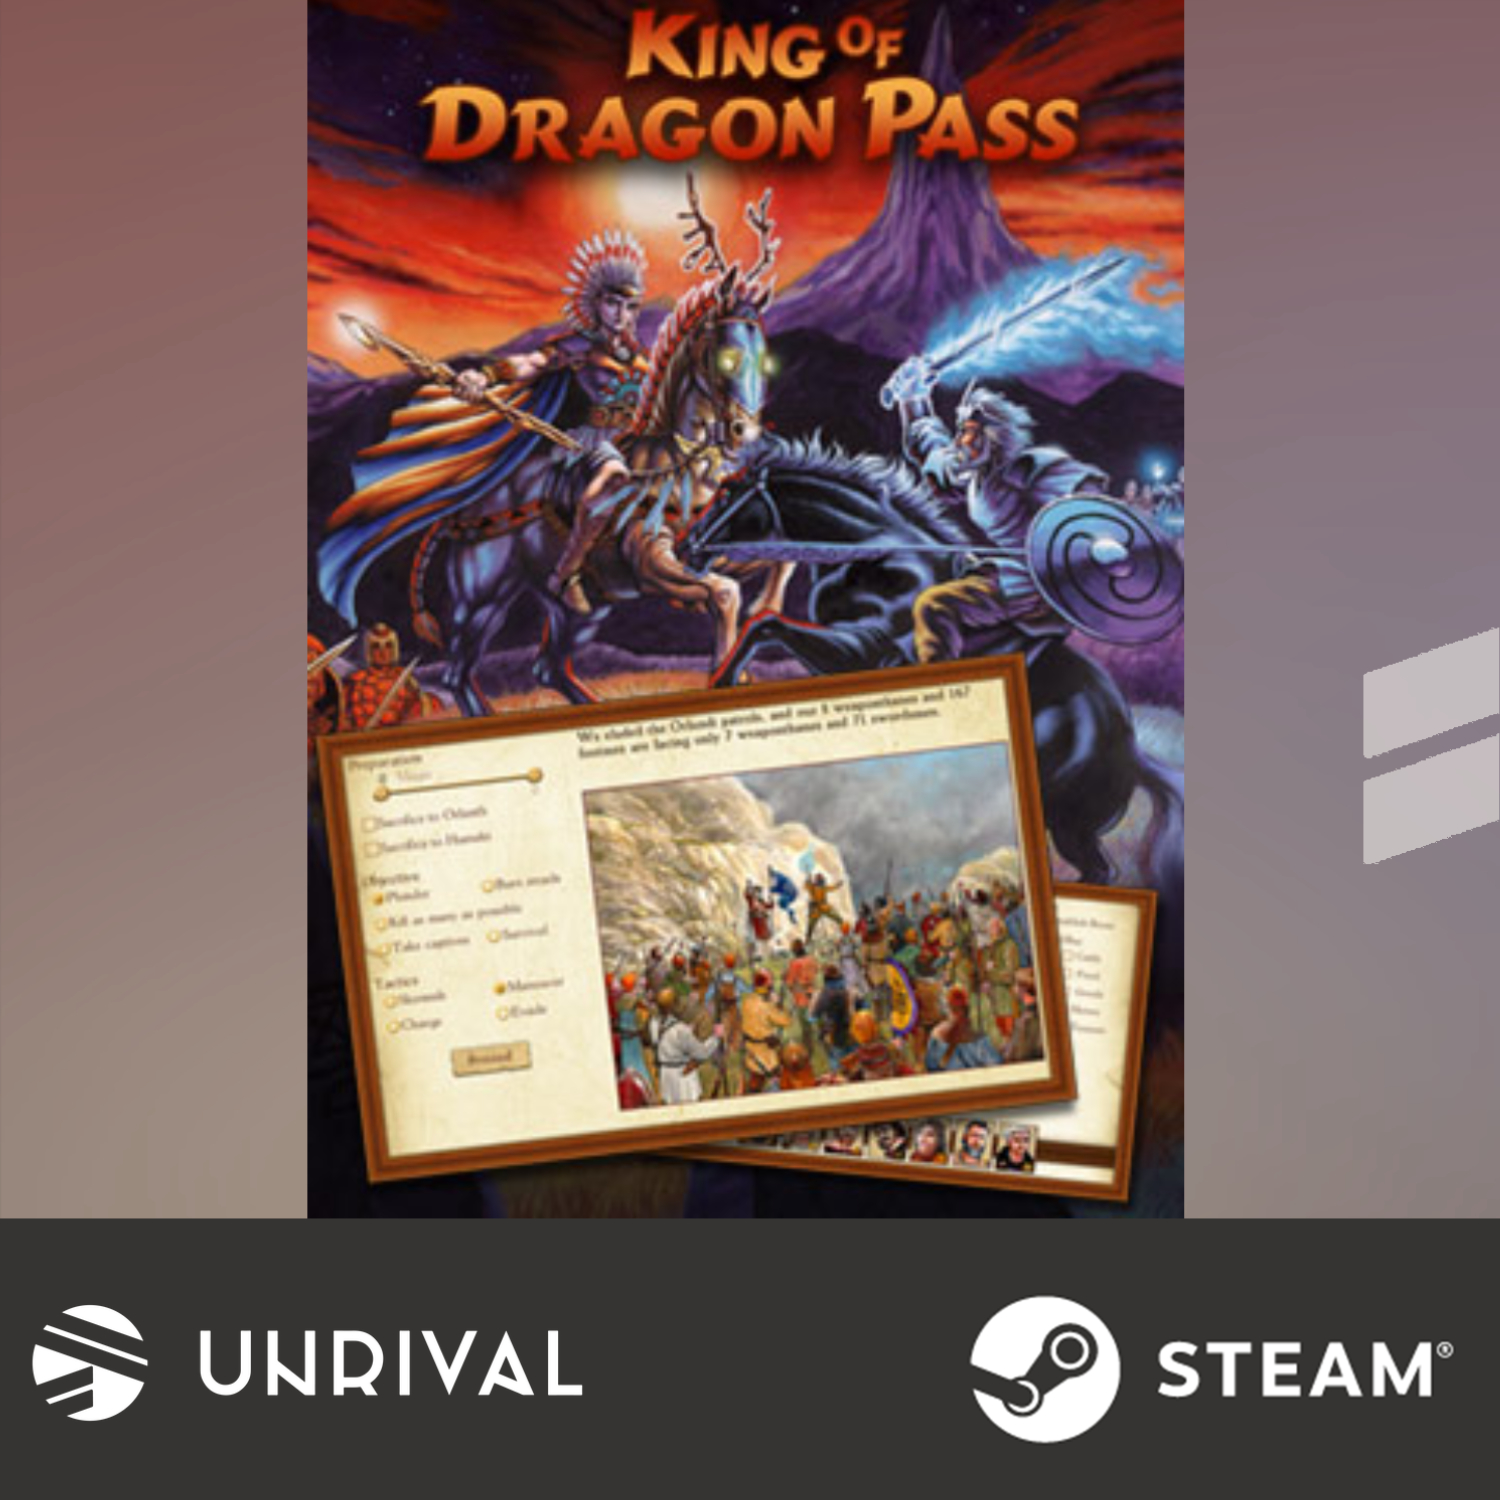 King of Dragon Pass PC Digital Download Game (Single Player) - Unrival